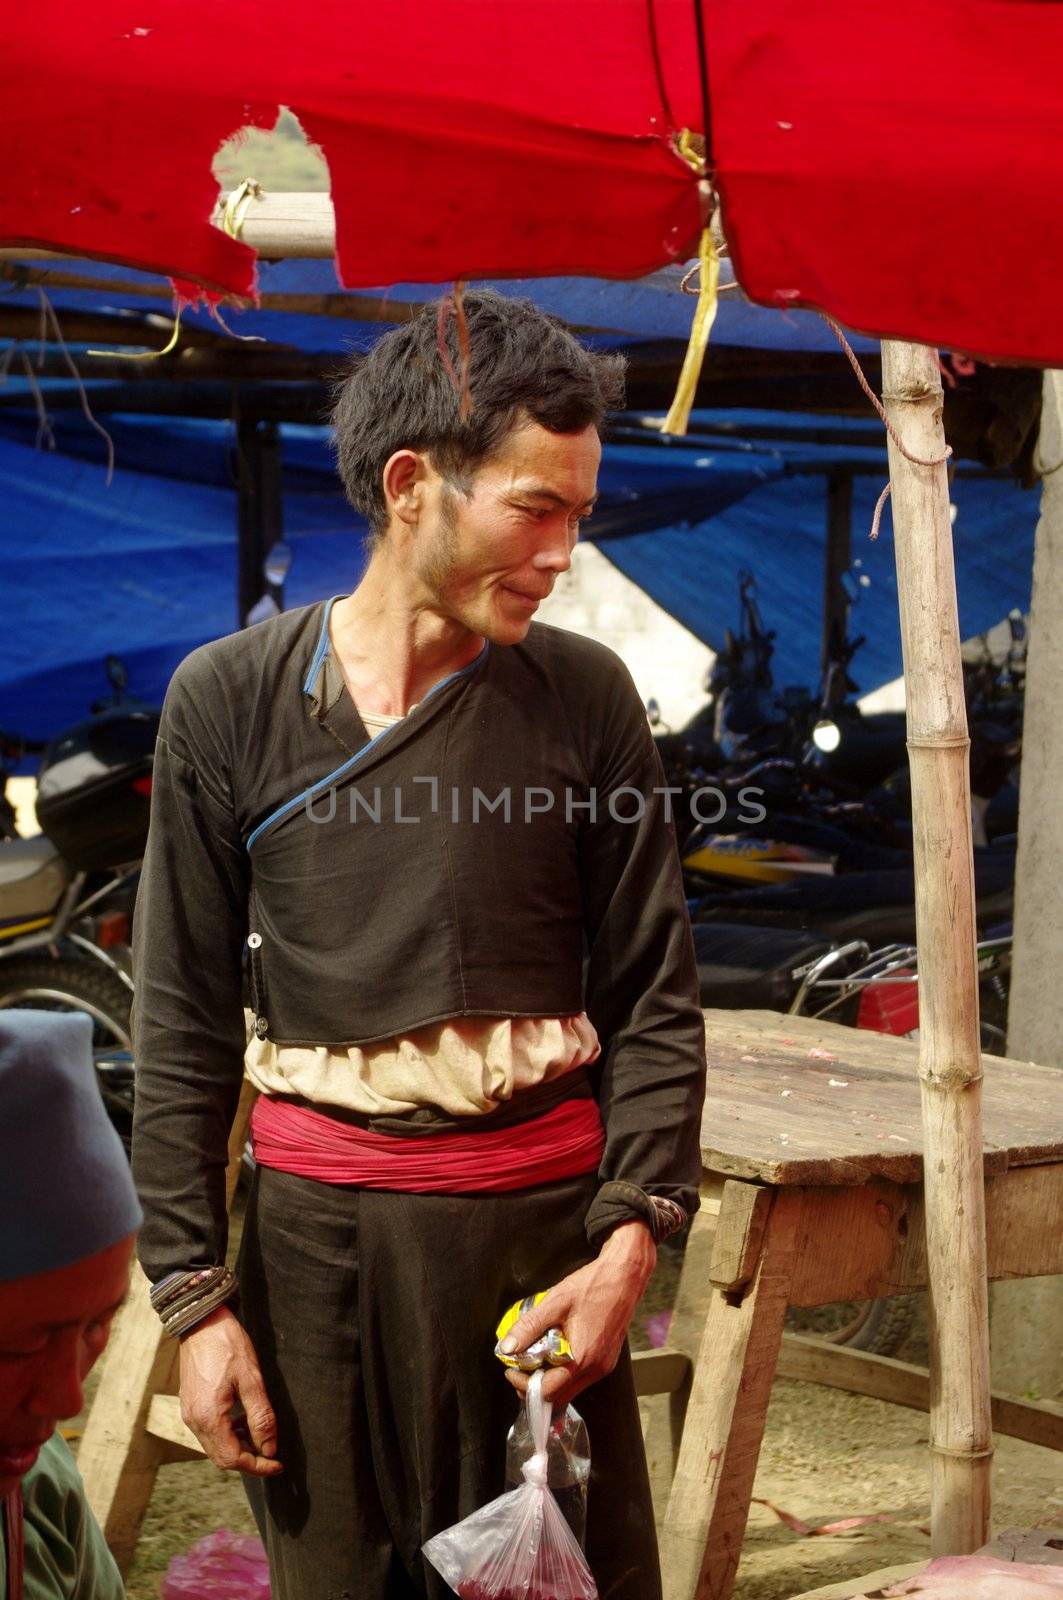 Man of the Red Dao ethnic group in Muong Hum market. North Vietnam. Costume rare on a man because only women have kept the tradition. Jacket and baggy black and red fabric belt